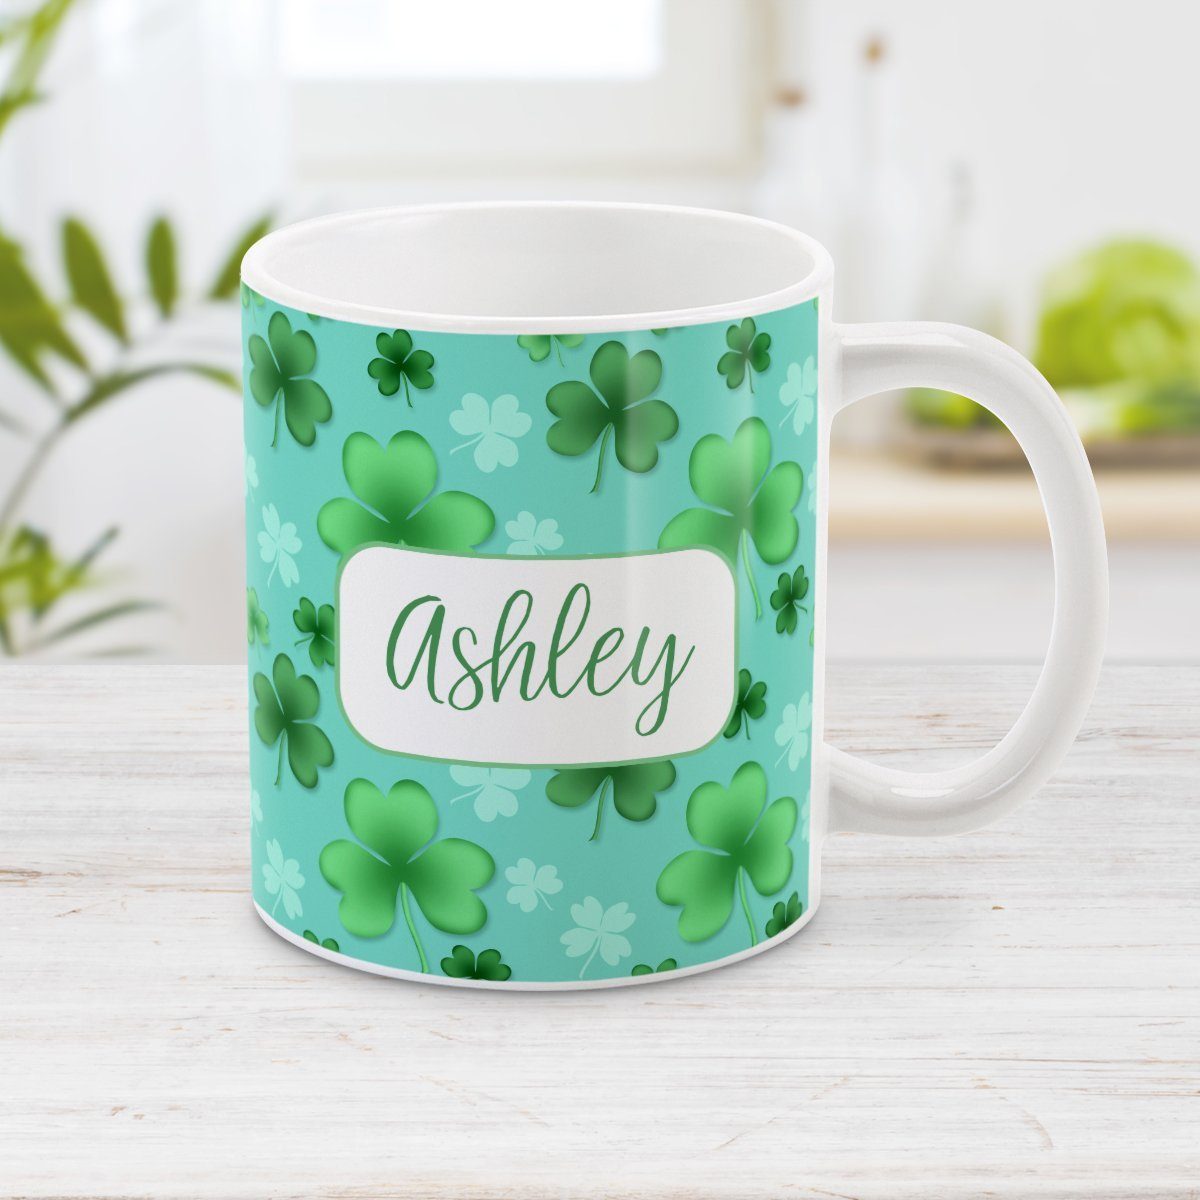 Personalized Lucky Clover Pattern Teal and Green Mug at Amy's Coffee Mugs. A ceramic coffee mug designed with a lucky green clover pattern with a 4-leaf clover among 3-leaf clovers, in different shades of green, over a teal background that wraps around the mug to the handle. Your name is personalized in green on white, over the lucky clover pattern.